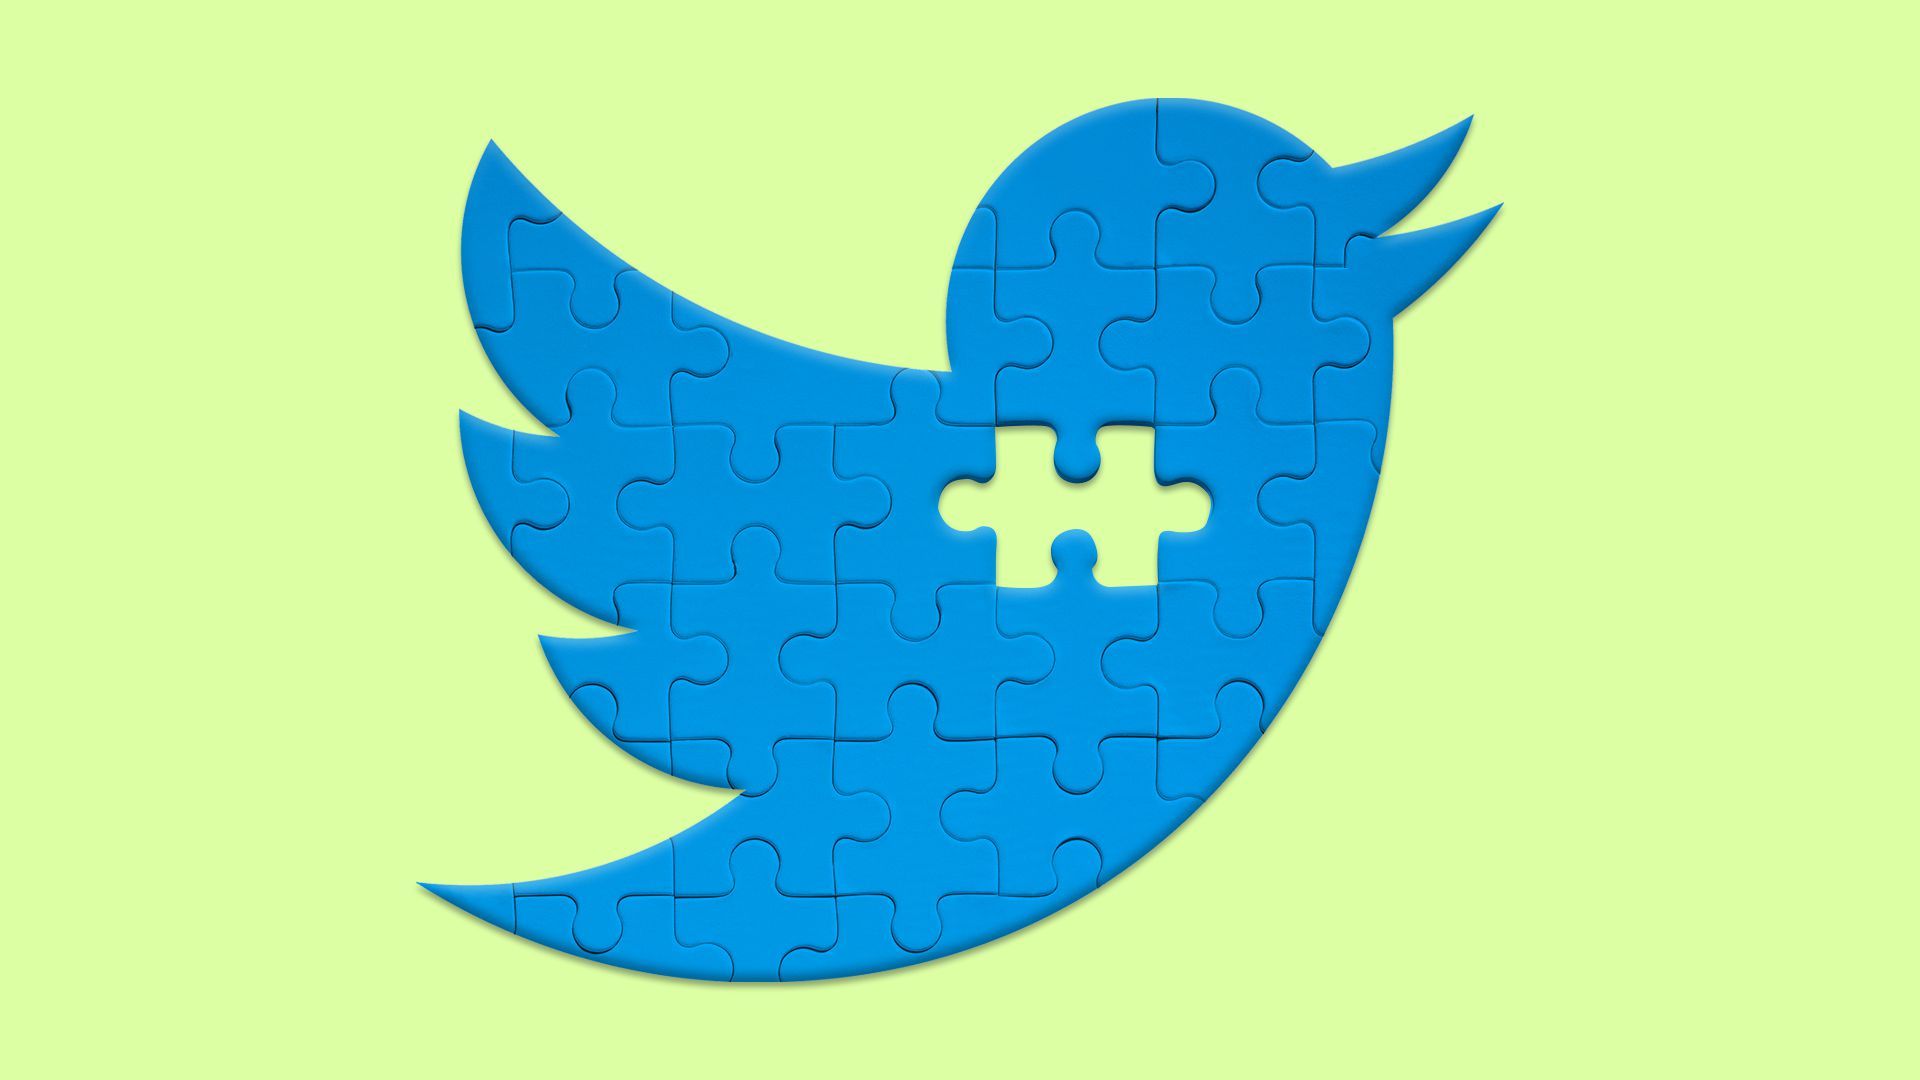 Illustration of a puzzle in the shape of the twitter logo